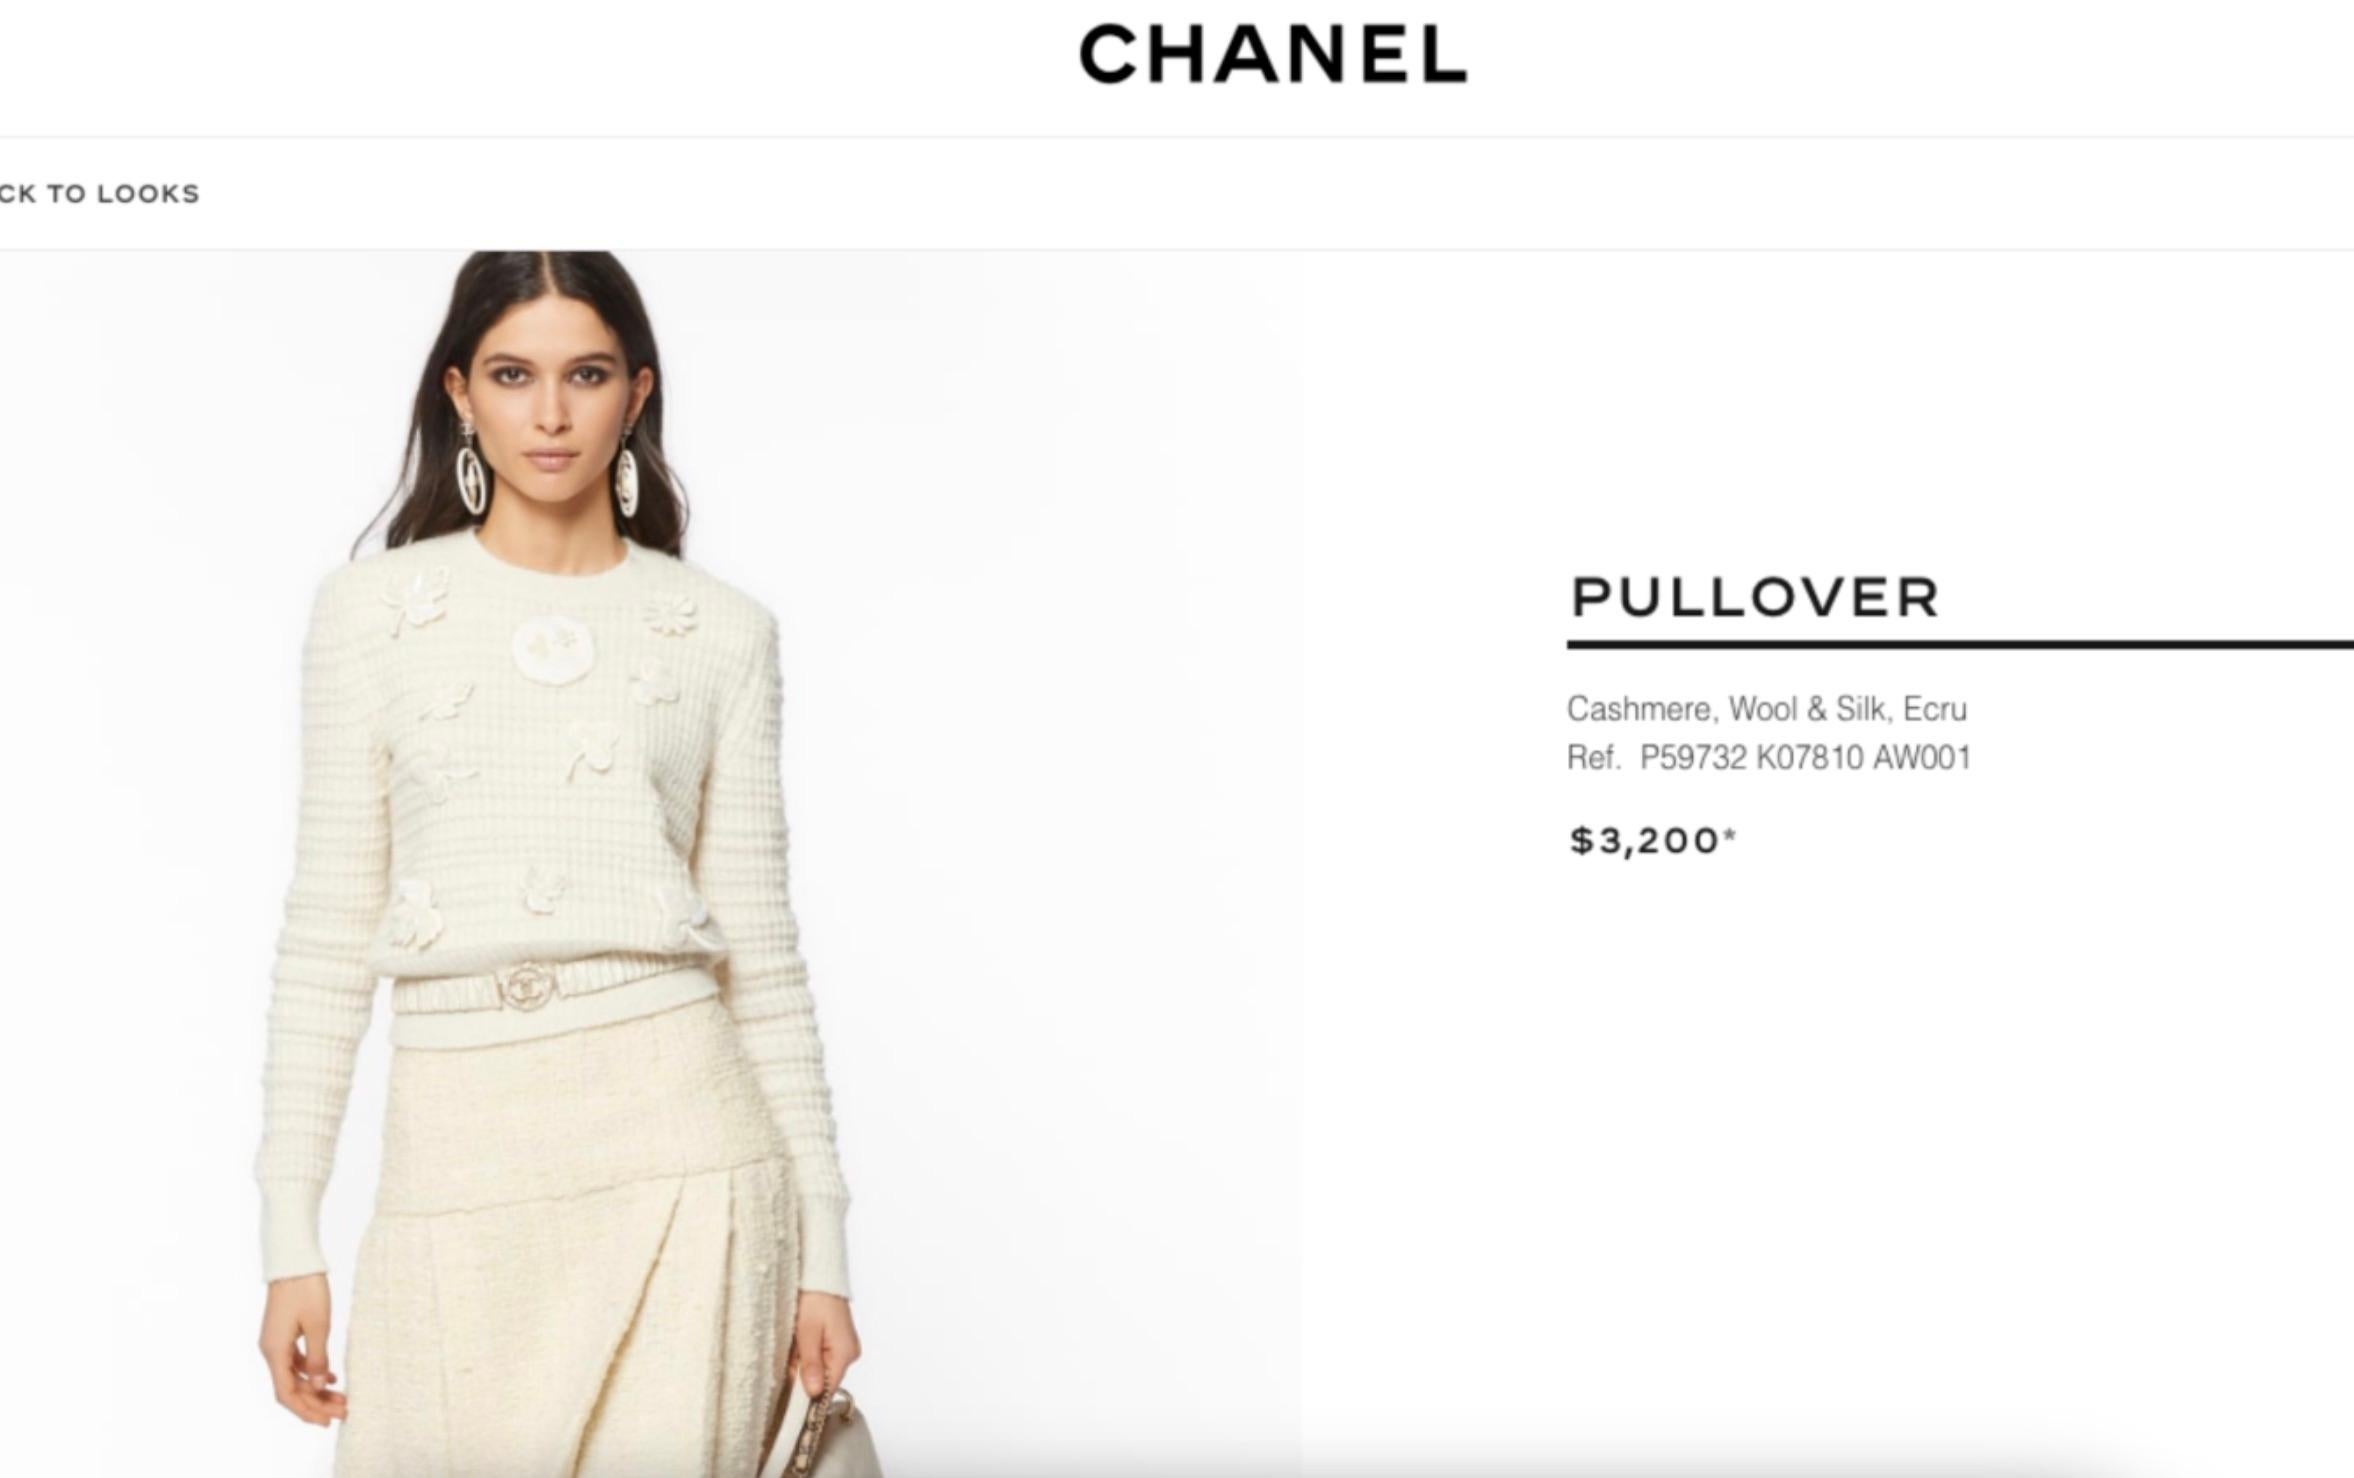 This ivory cashmere sweater is a cozy yet chic piece from Chanel's first winter apres-ski Coco Neige 2018 collection. Boasting a classic round neckline, its front is adorned with delicate leaf and flower appliqués.
The sweater is in excellent